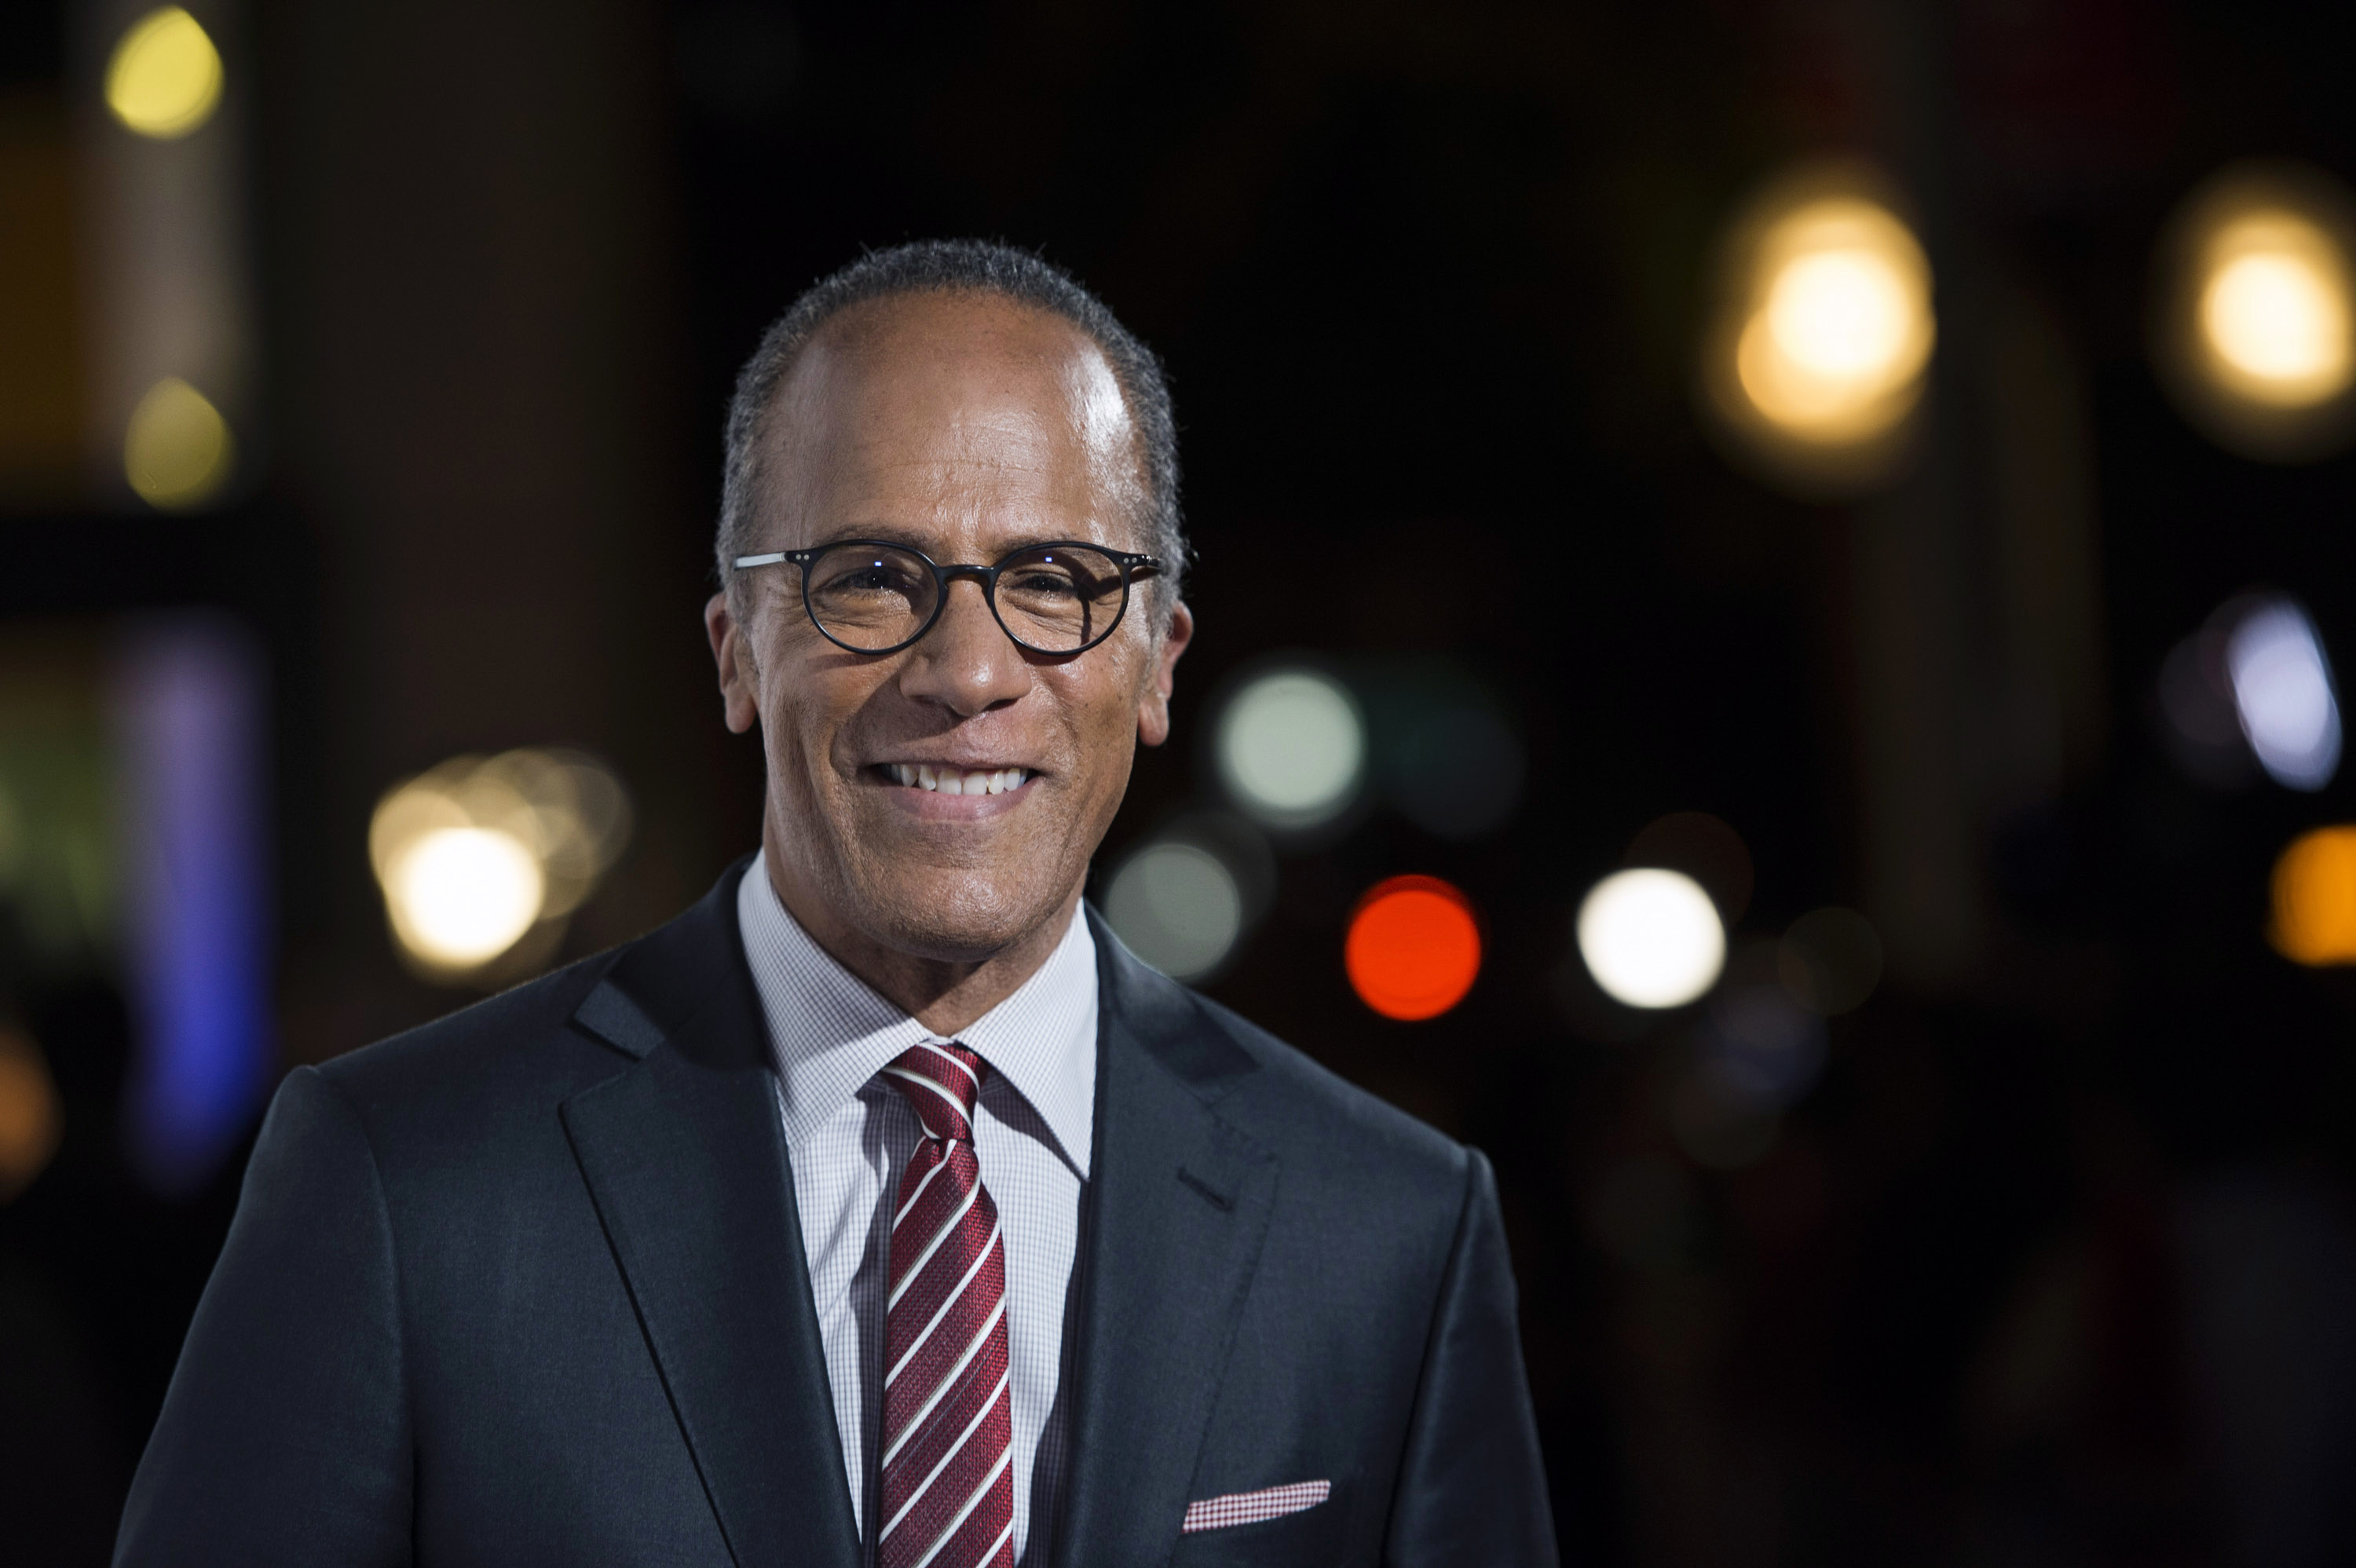 In this Oct. 28, 2015, file photo, NBC Nightly News anchor Lester Holt arrives at the 9th Annual California Hall of Fame induction ceremonies at the California Museum, in Sacramento, Calif.  Holt will moderate the first scheduled presidential debate on Sept. 26, 2016 with  ABC’s Martha Raddatz, CNN’s Anderson Cooper and Fox News Channel’s Chris Wallace lined up for others. (Jose Luis Villegas/The Sacramento Bee via AP, Pool, File)